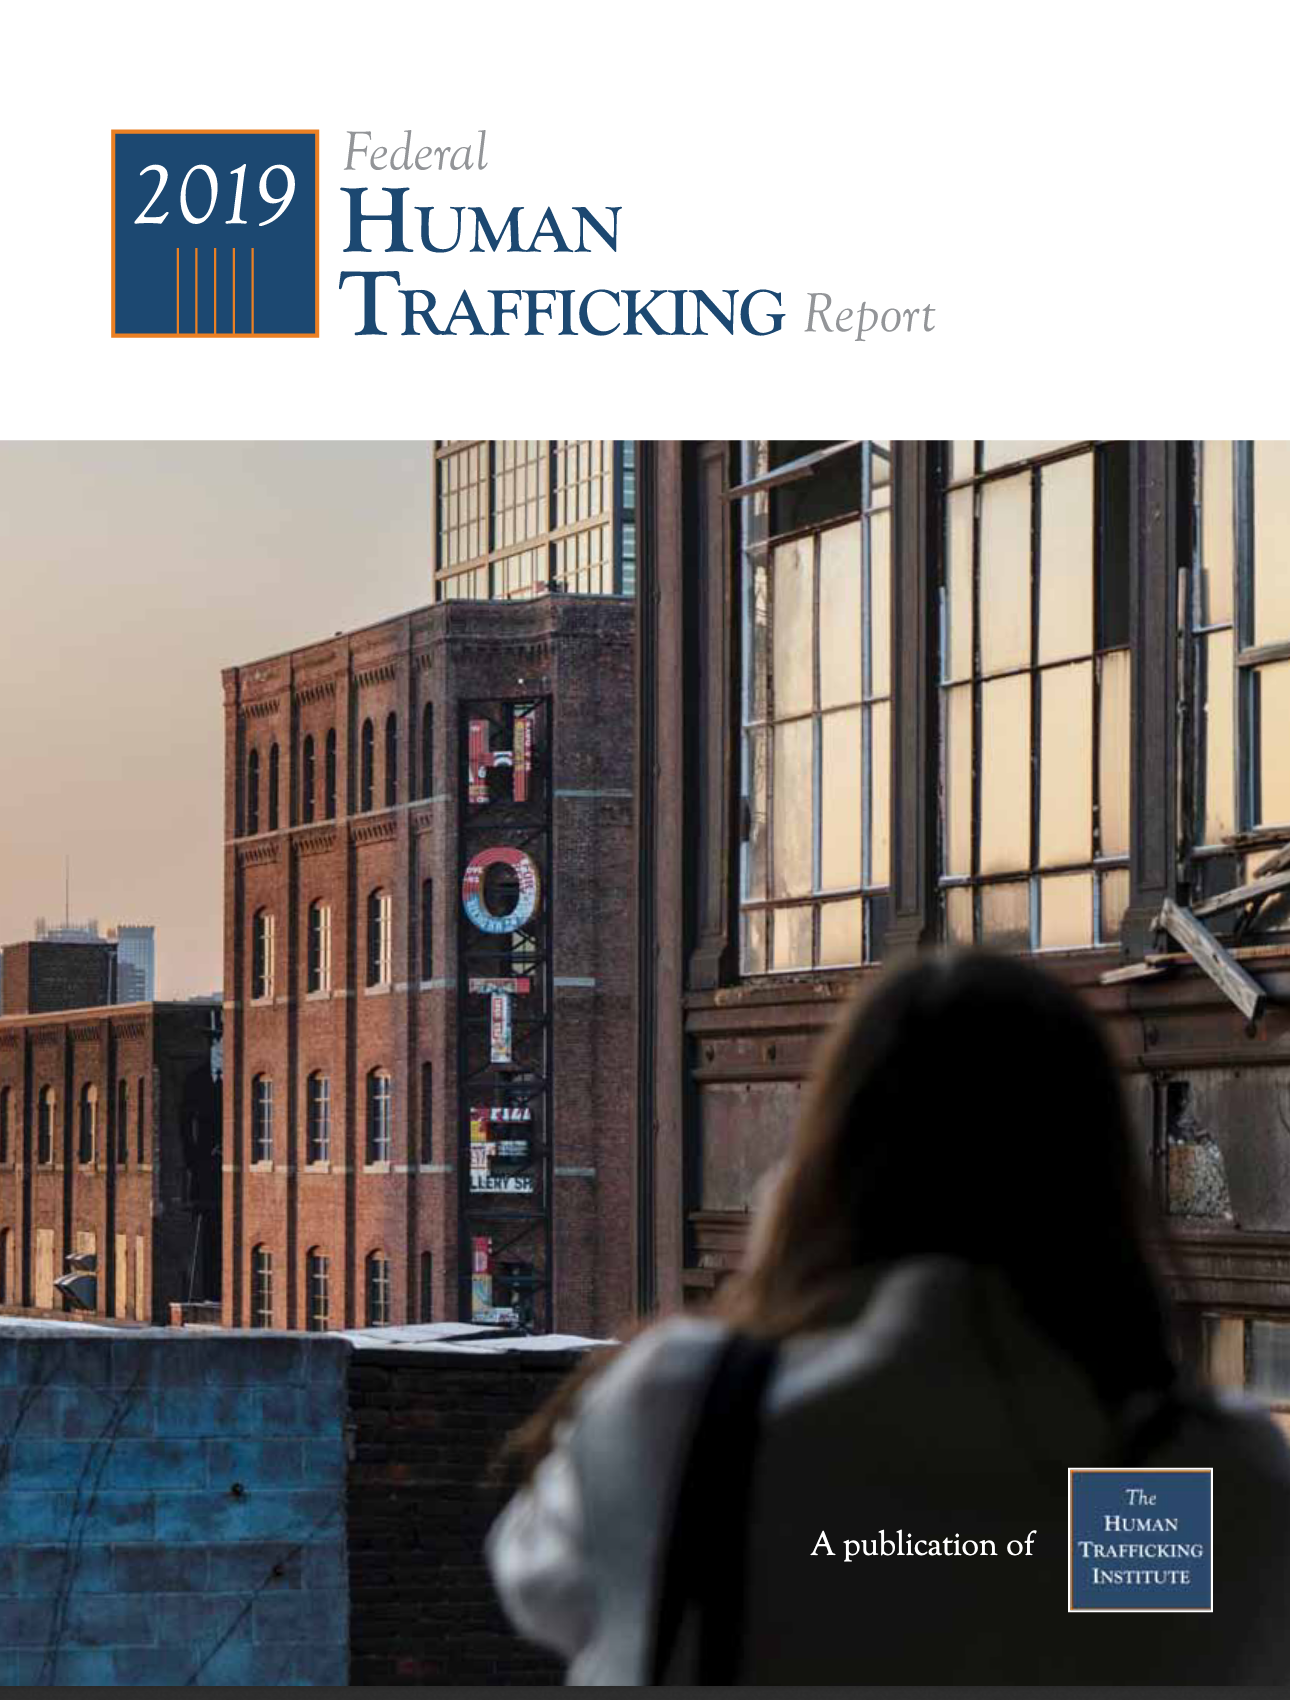 Cover of the 2019 Federal Human Trafficking Report